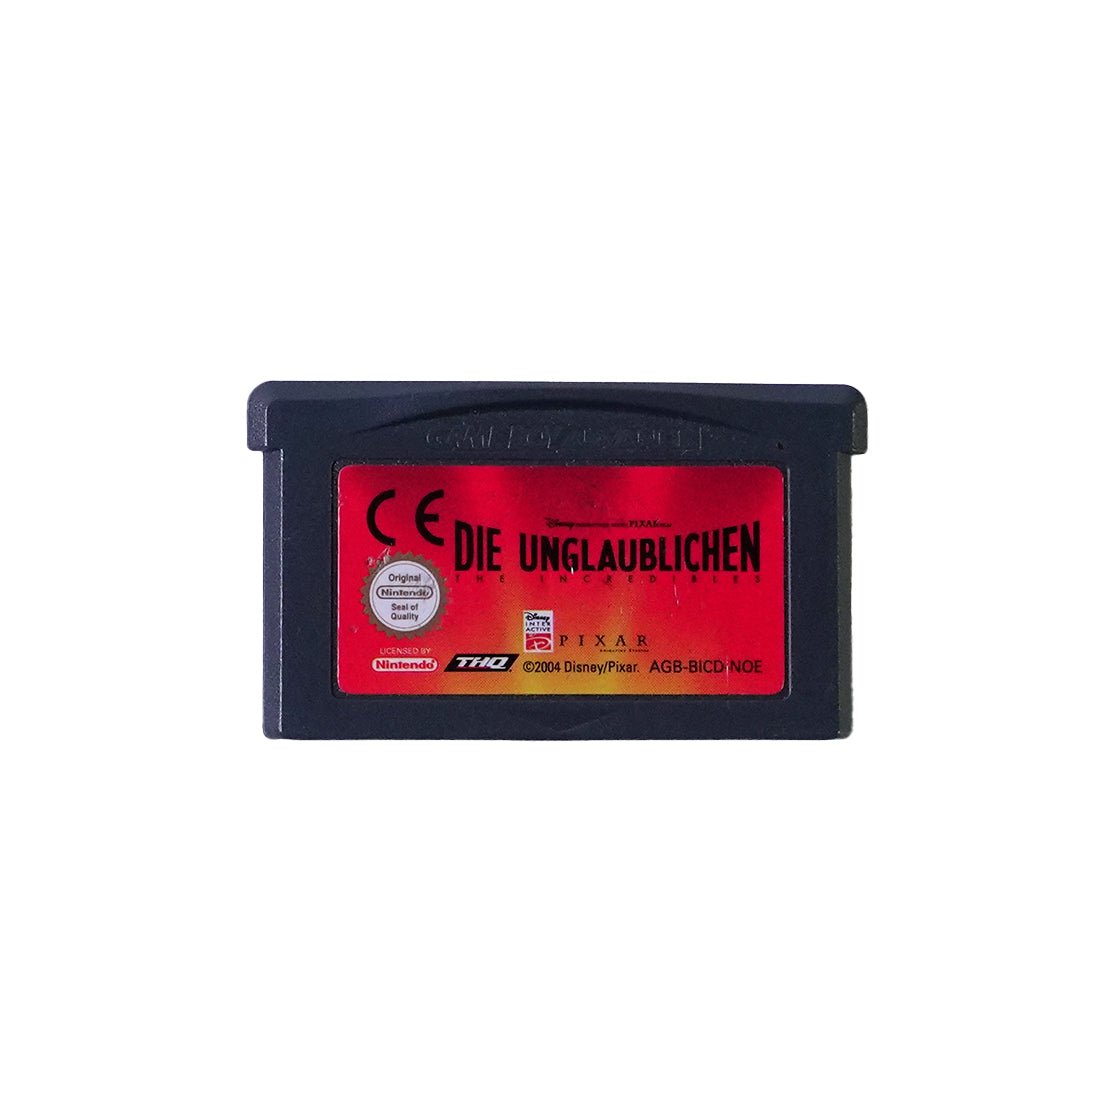 (Pre-Owned) The Incredibles (Die Unglaublichen) Game - Gameboy Advance - ريترو - Store 974 | ستور ٩٧٤